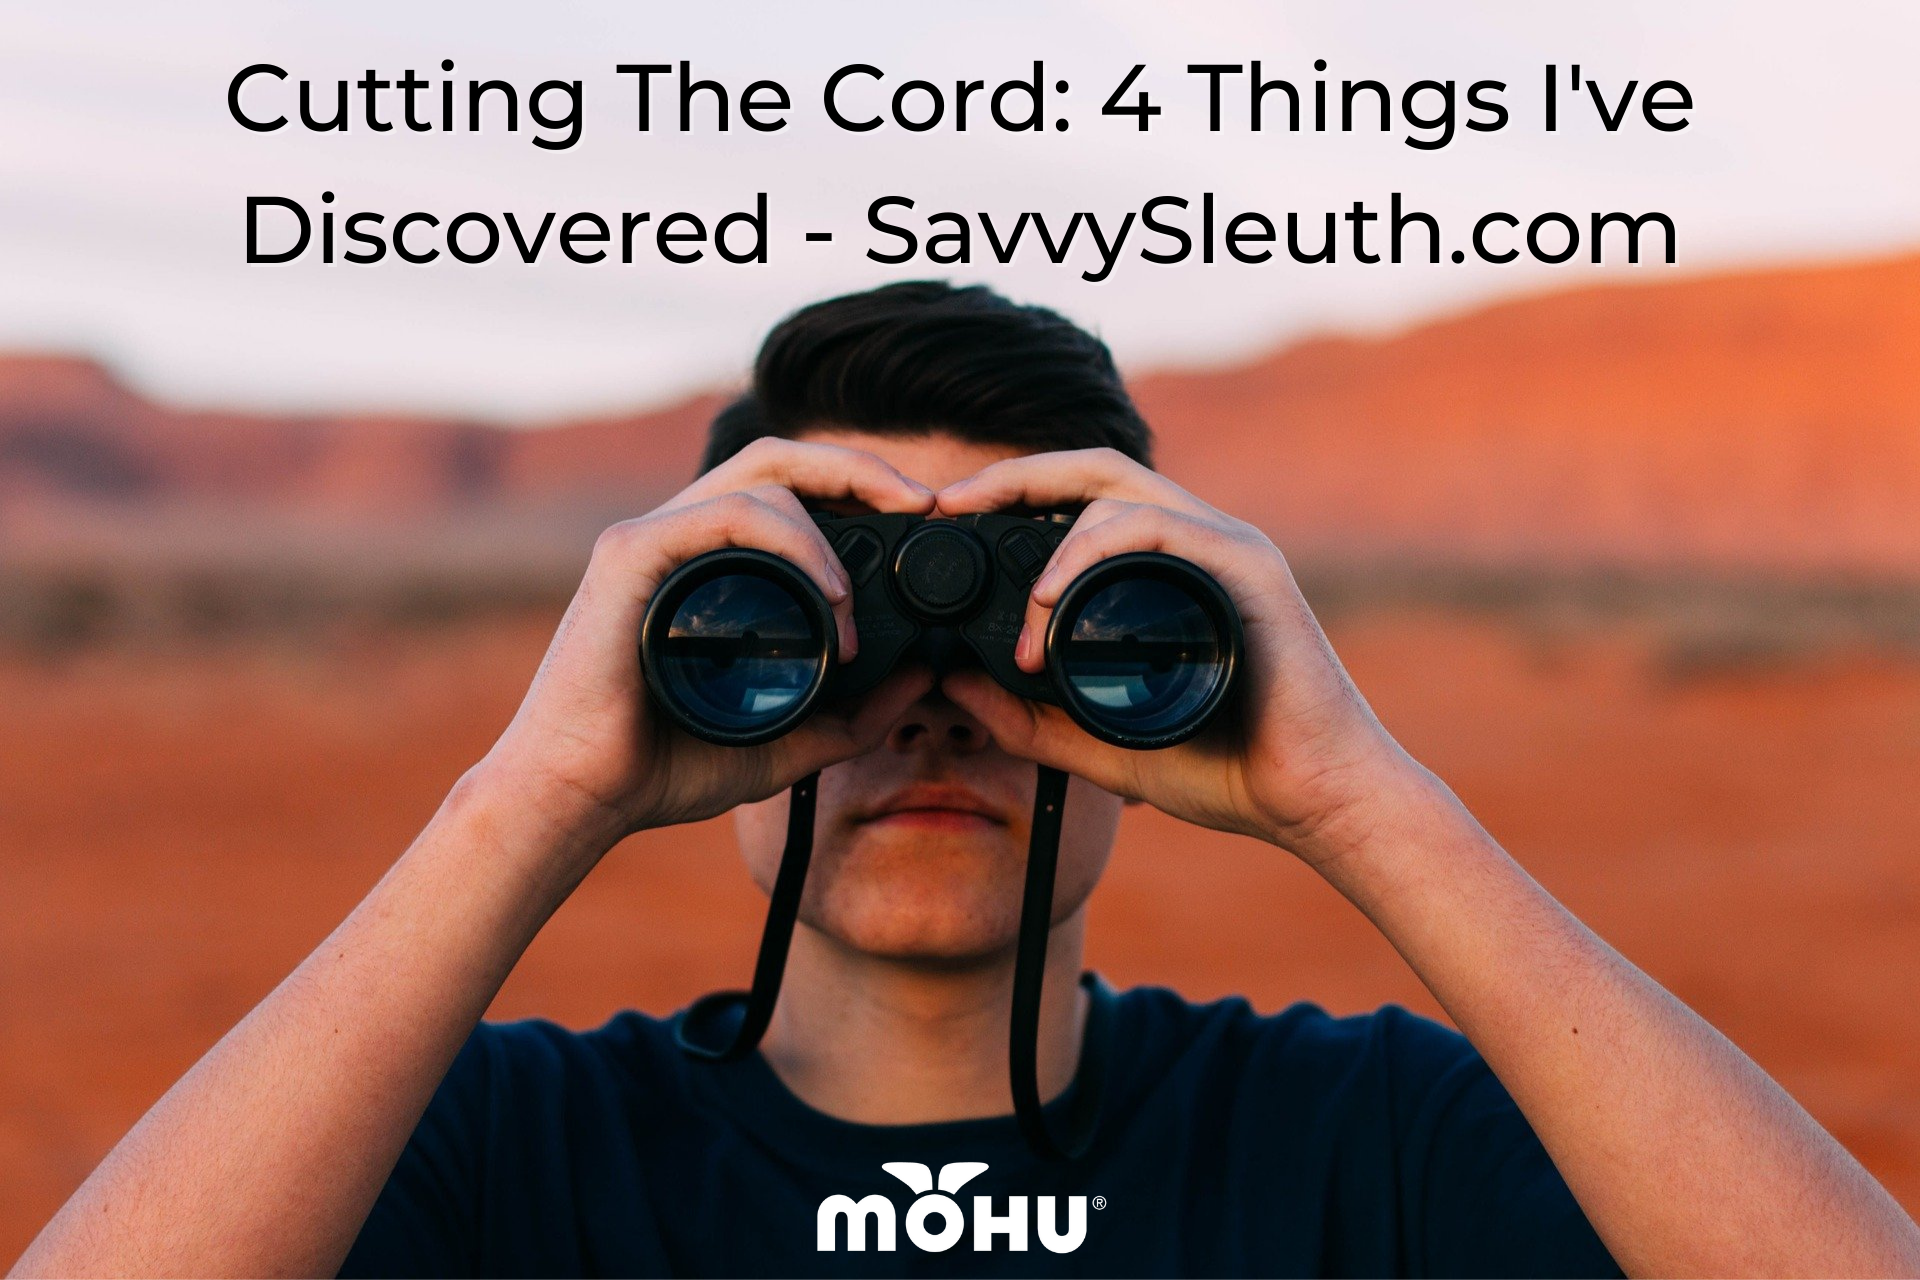 Man with binoculars, Cutting The Cord: 4 Things I've Discovered - SavvySleuth.com, Mohu logo